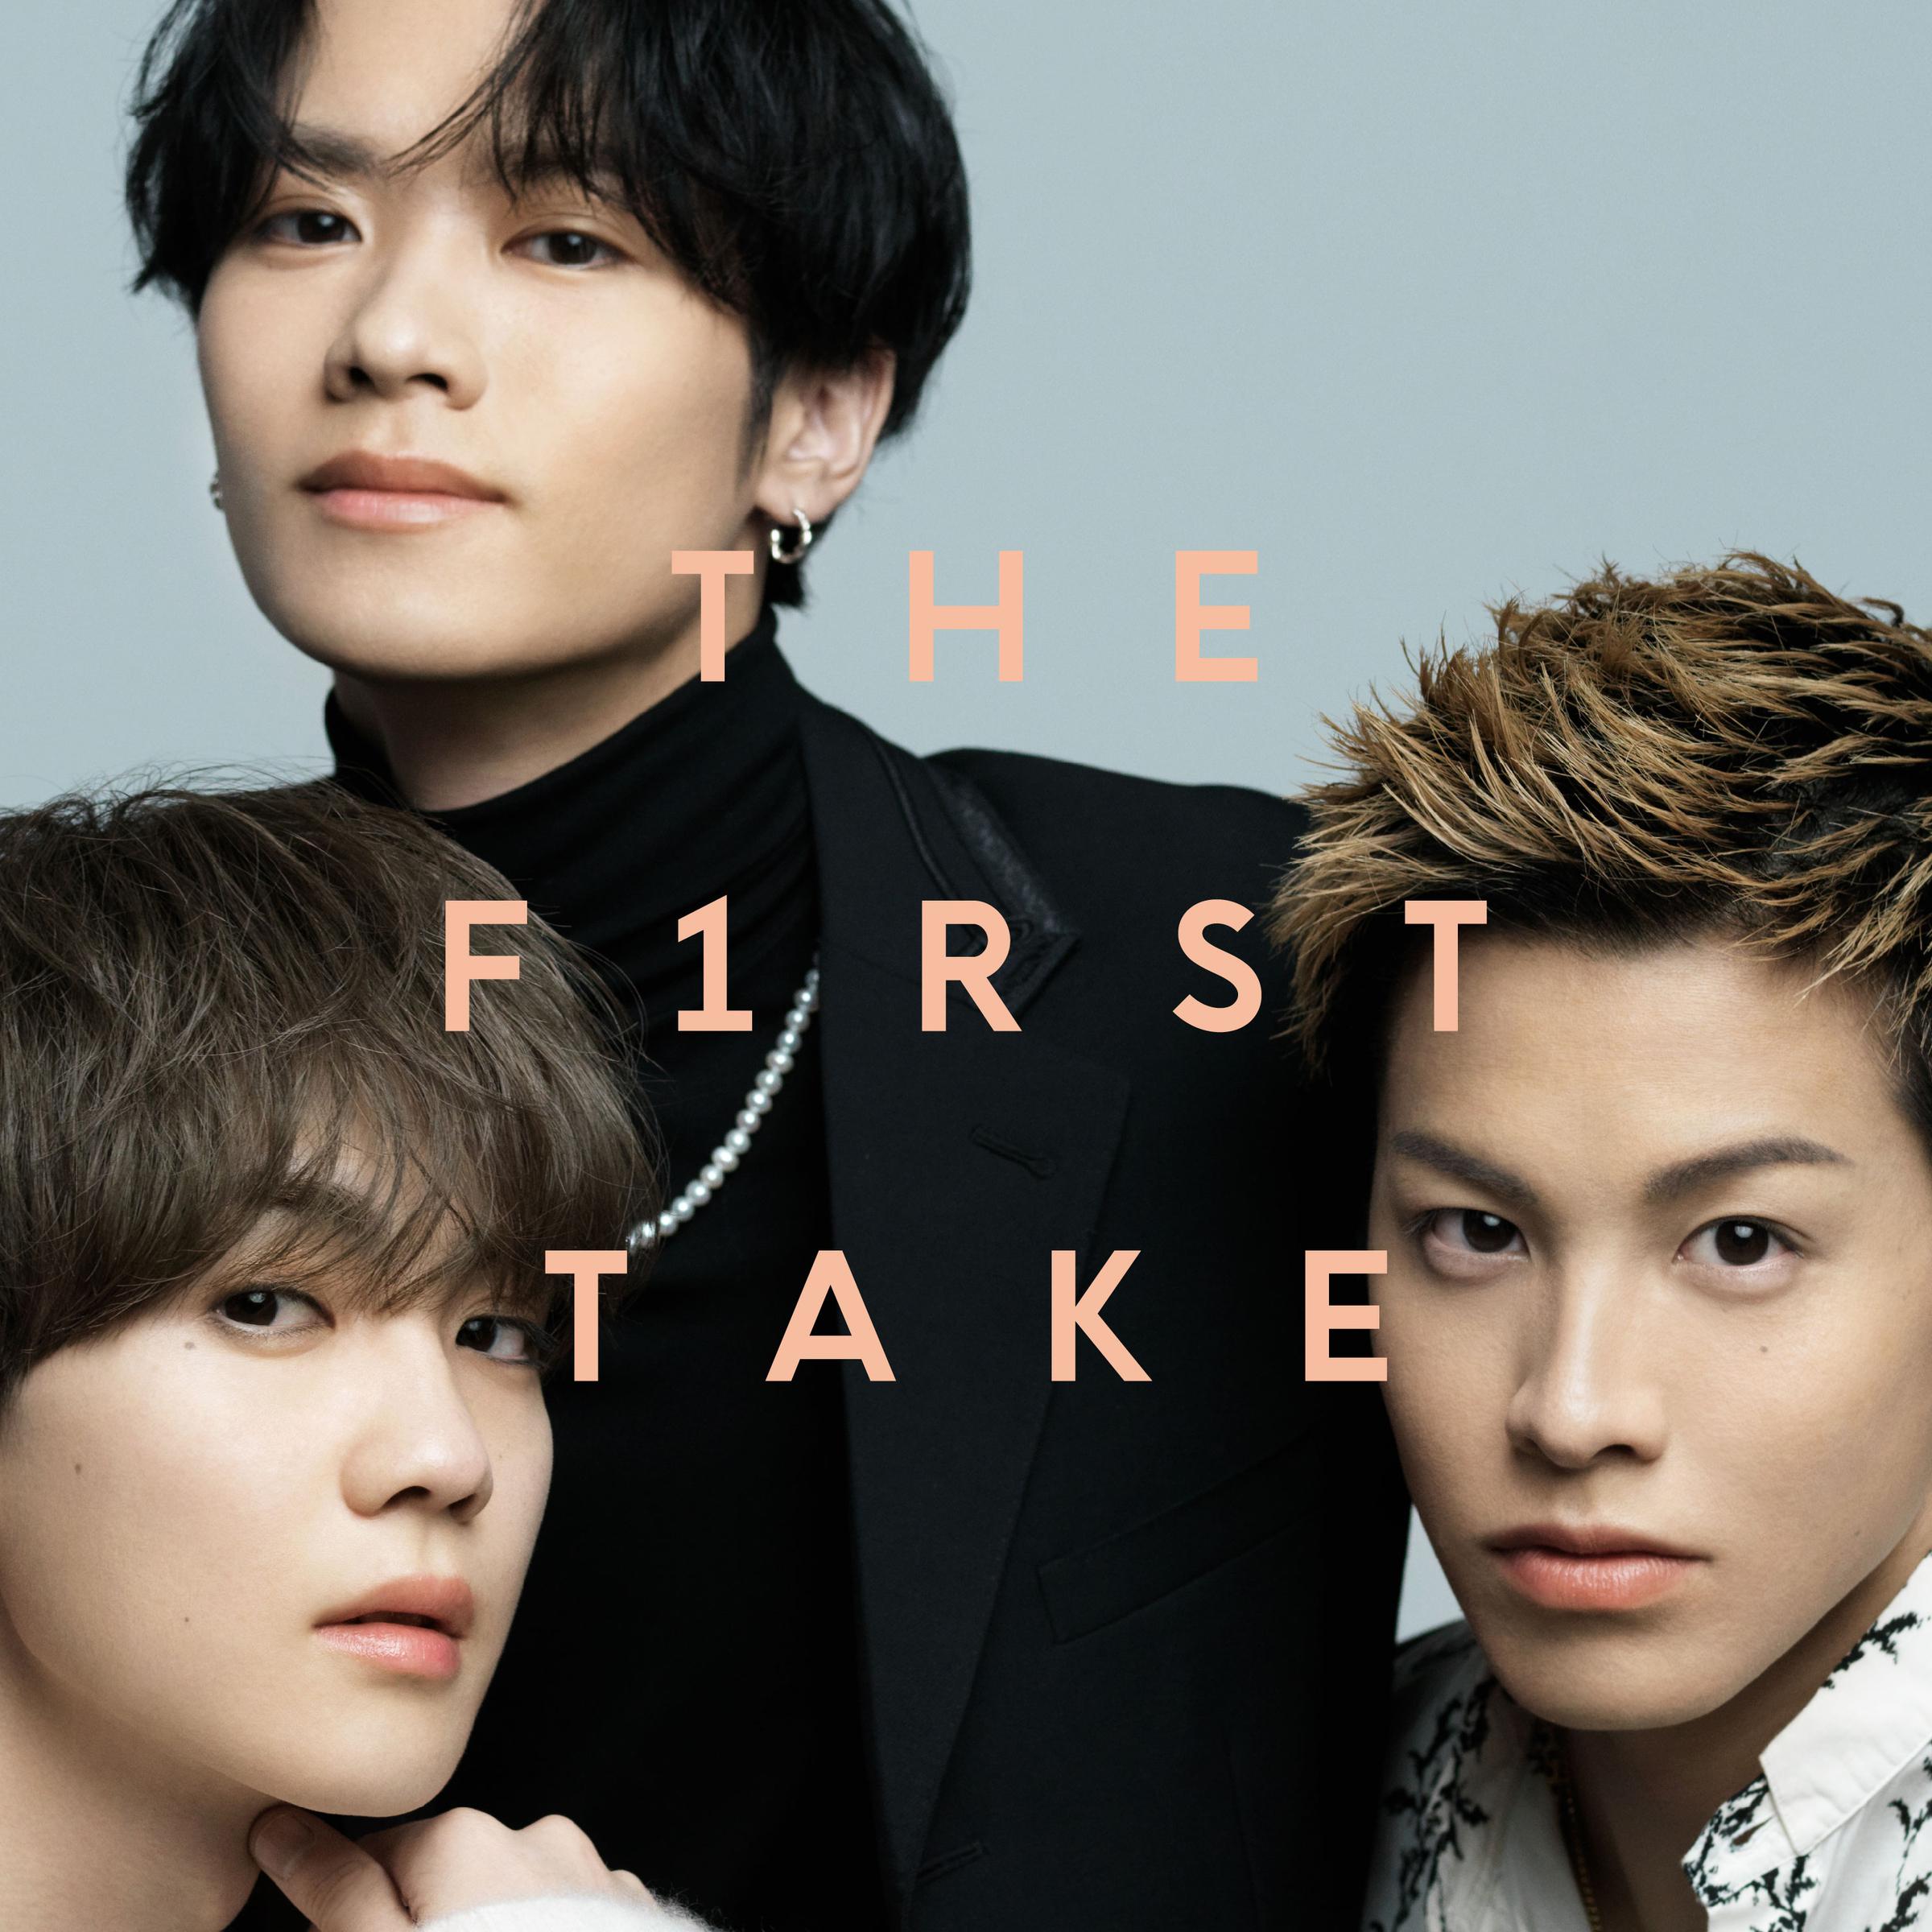 Starlight - From THE FIRST TAKE歌词 歌手THE RAMPAGE from EXILE TRIBE-专辑Starlight - From THE FIRST TAKE-单曲《Starlight - From THE FIRST TAKE》LRC歌词下载